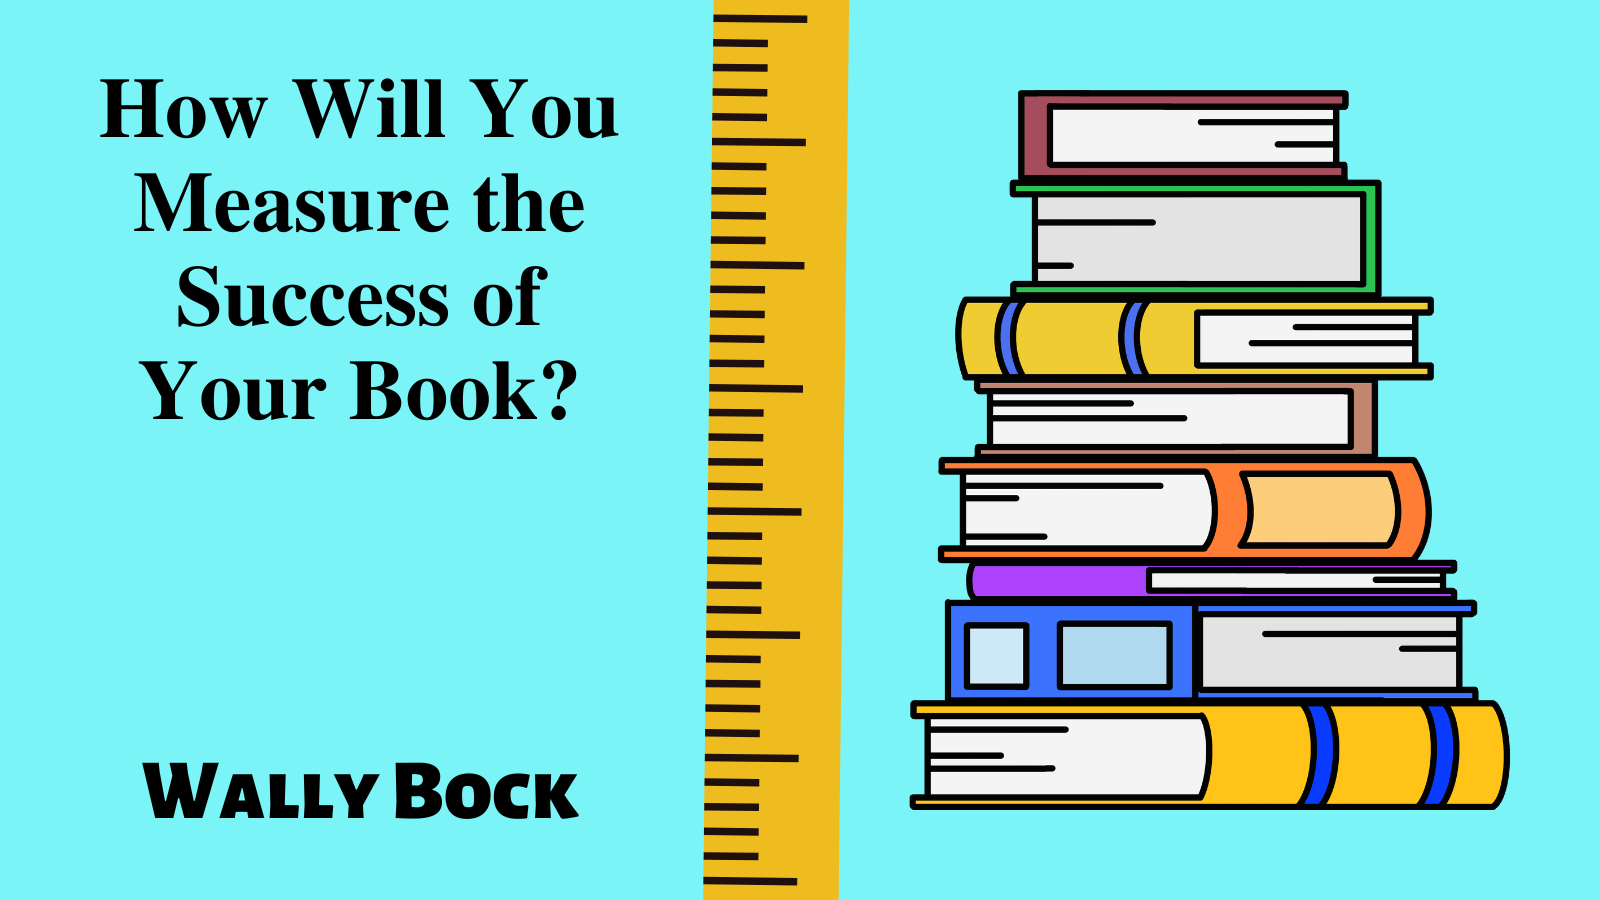 How will you measure the success of your book?